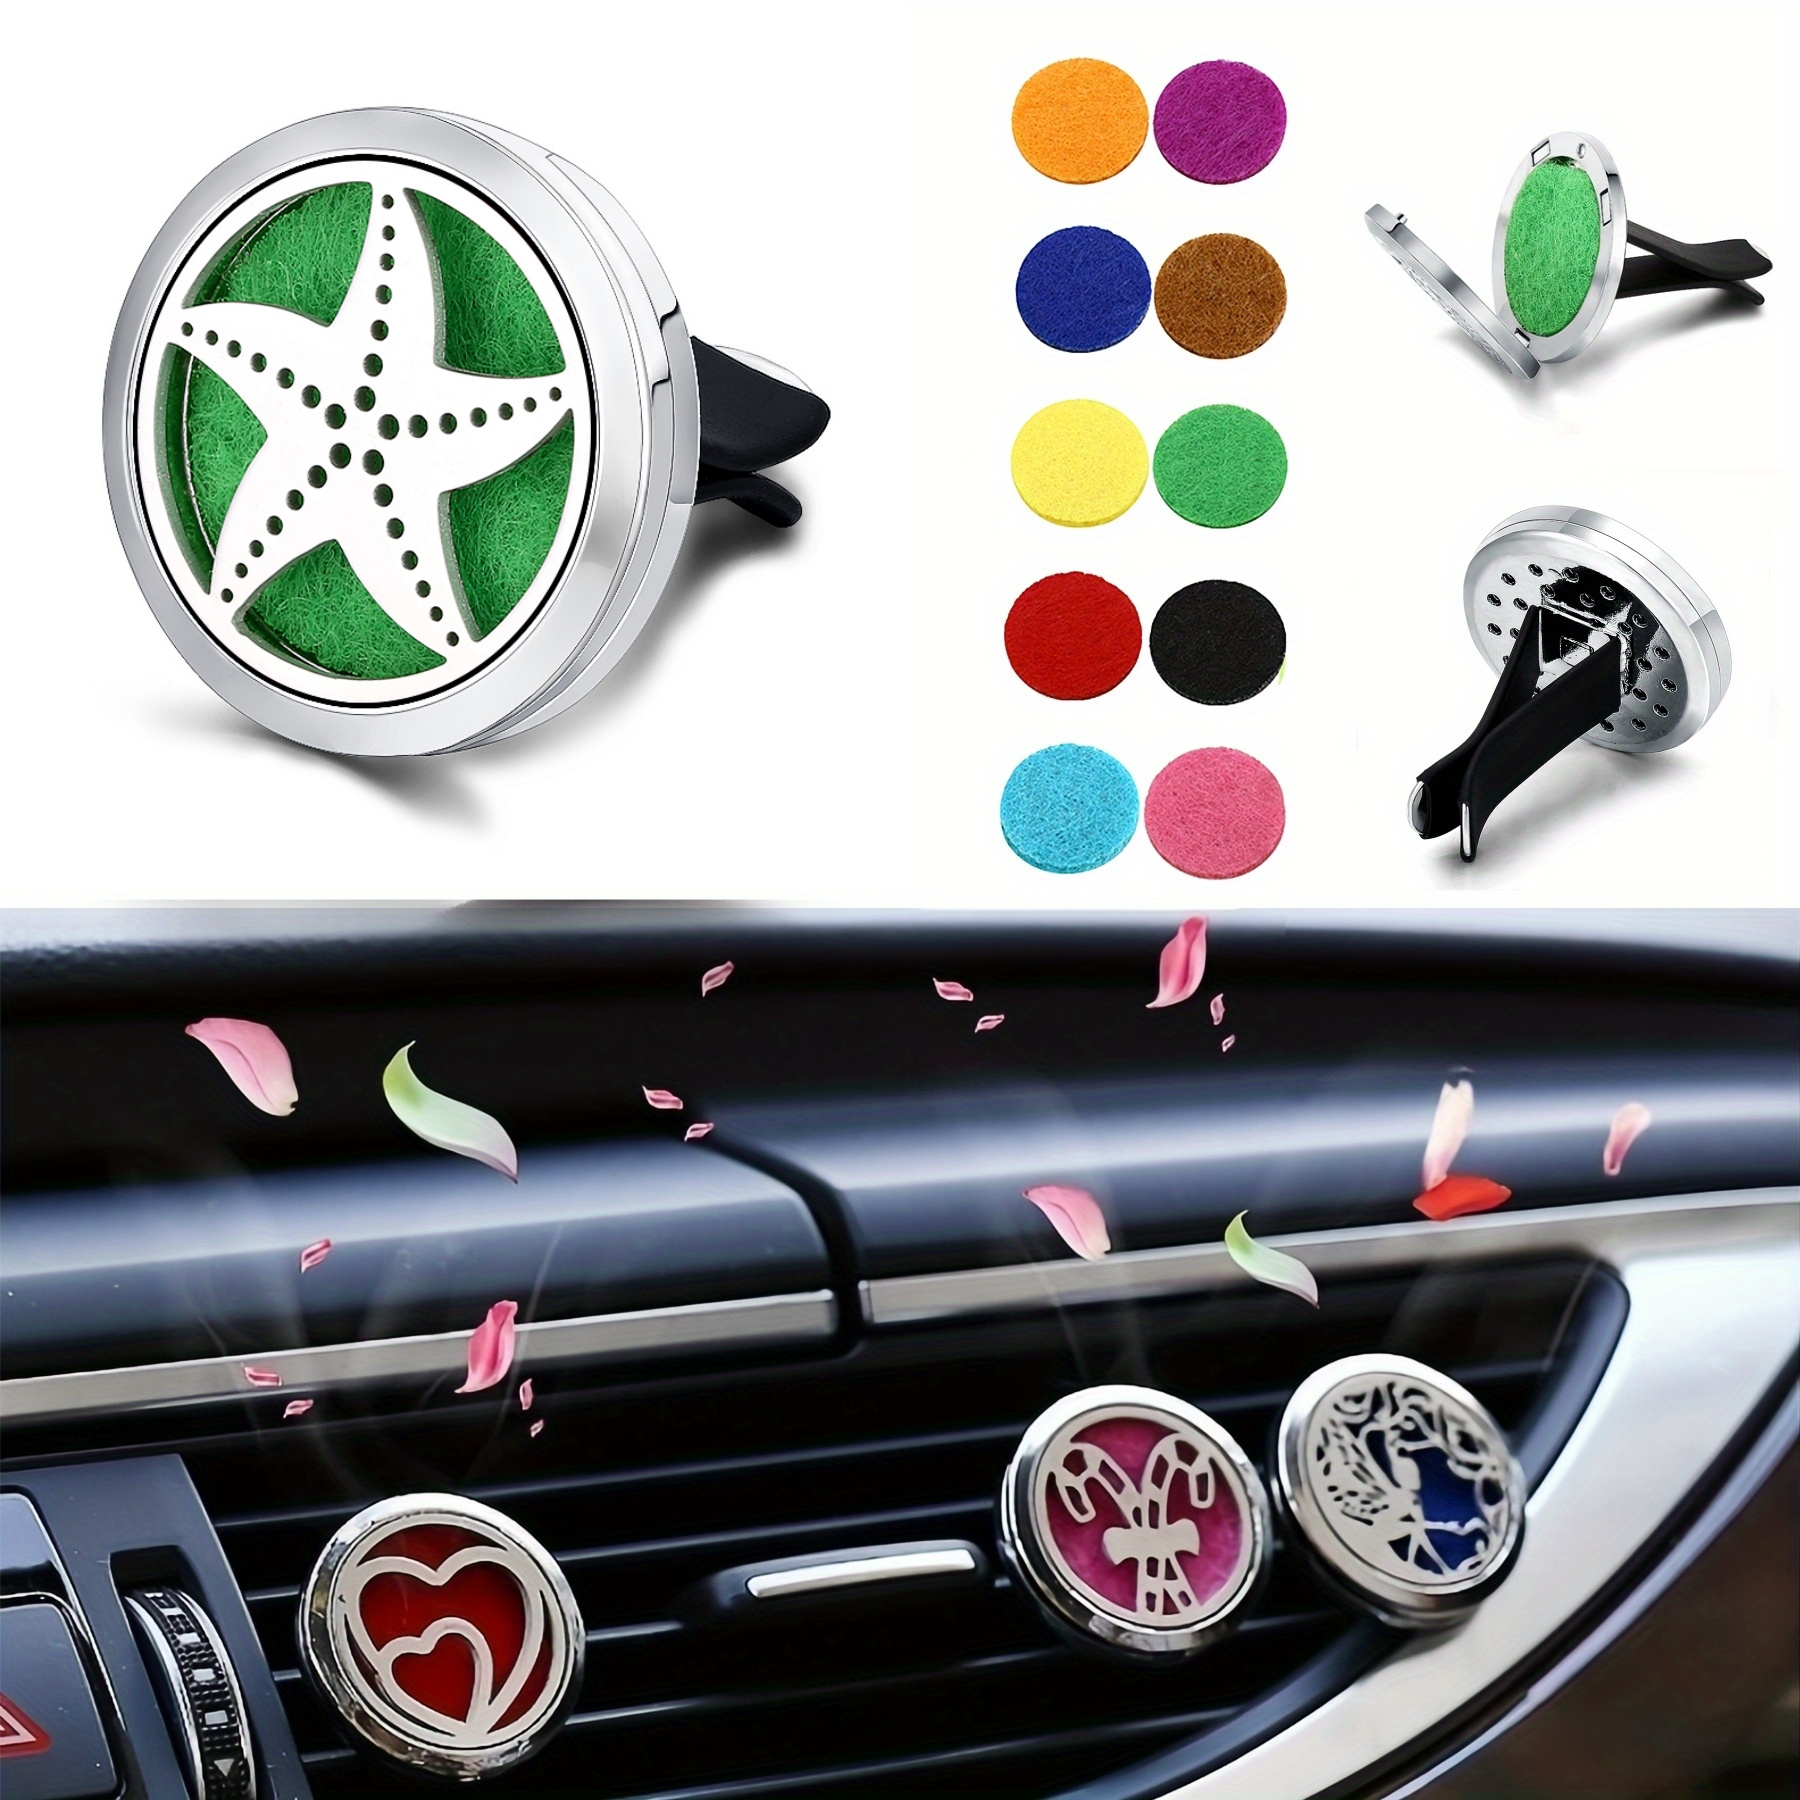 Car Diffuser Fragrance Car Air Fresheners Automotive Aromatherapy Diffuser